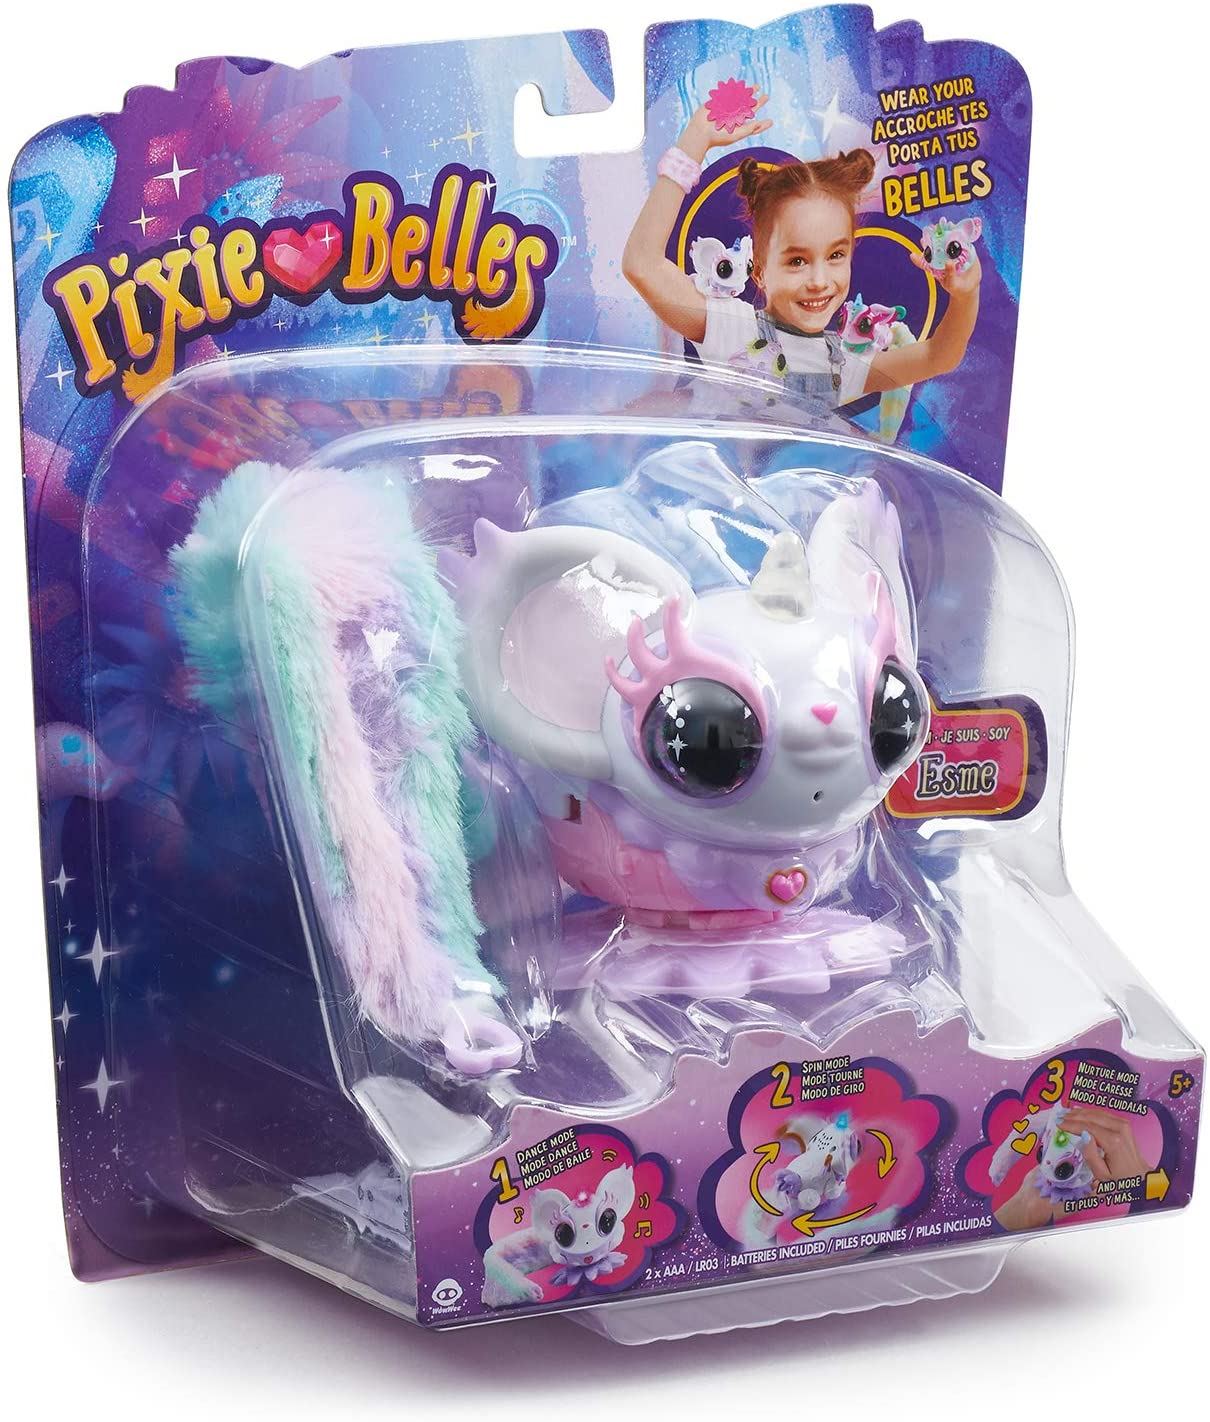 ESME Pixie Belles Interactive Enchanted Animal Toy WowWee